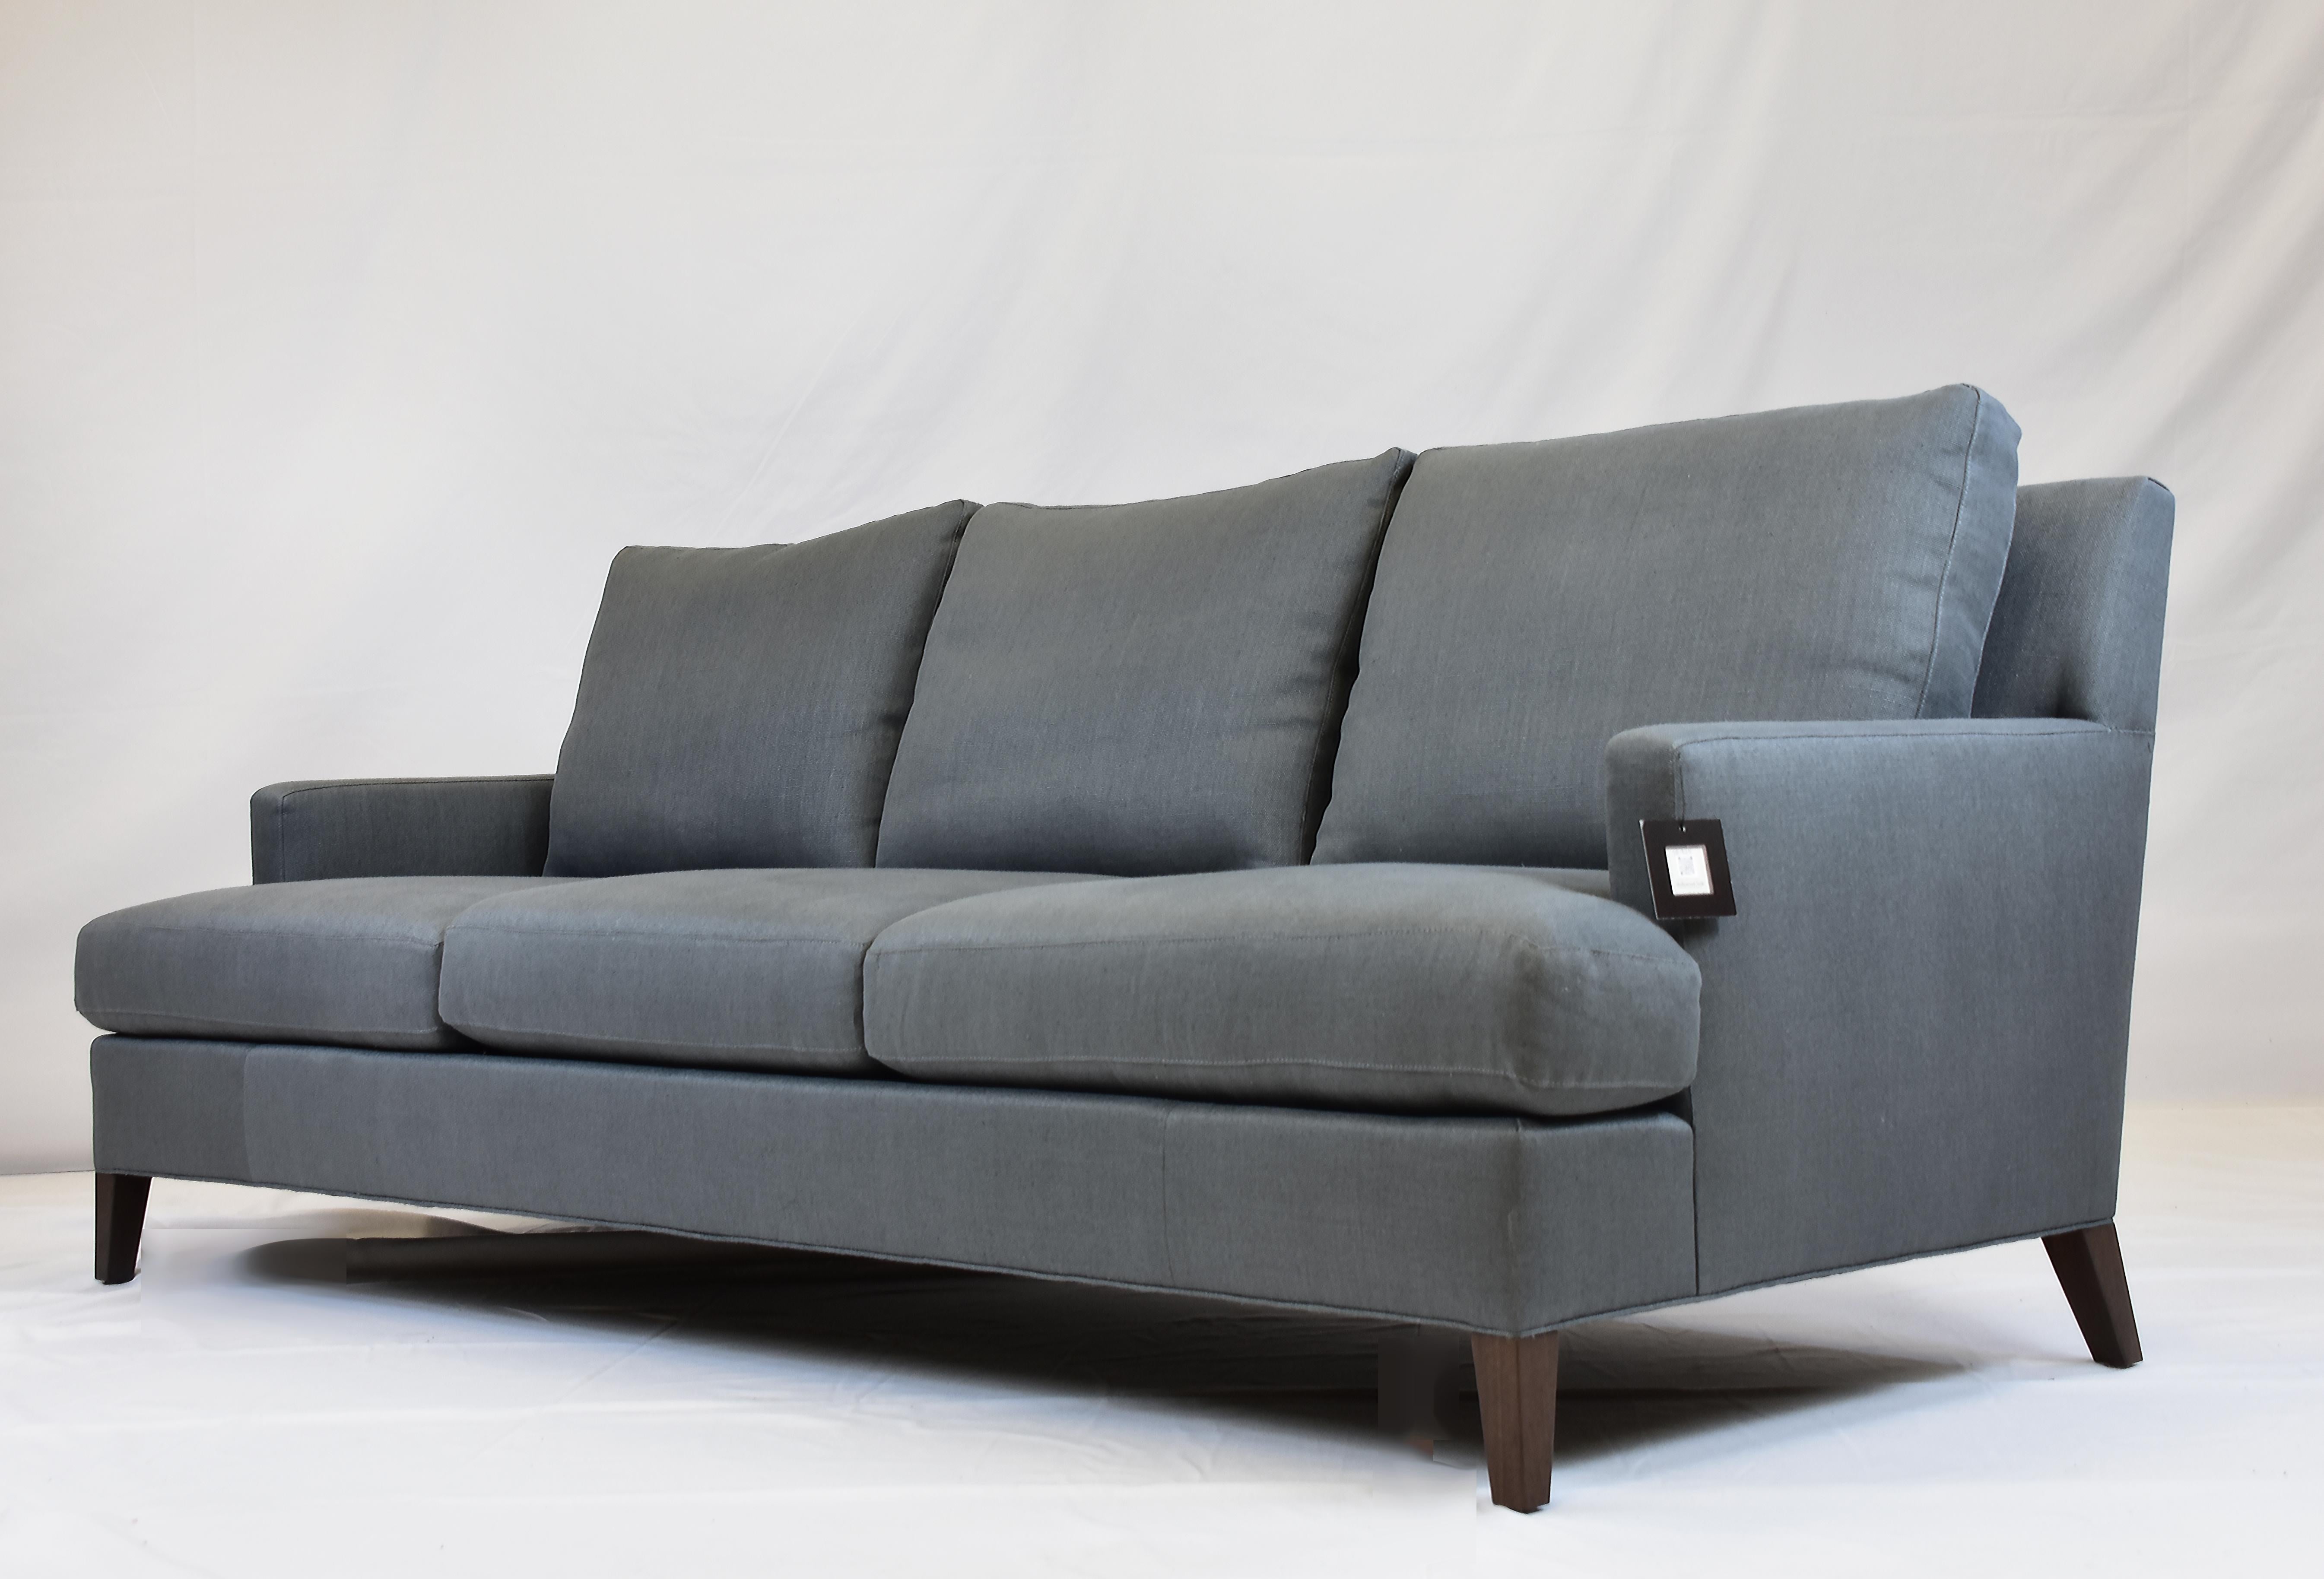 Le Jeune Upholstery Hollywood Sofa Showroom Model

Offered for sale is a Le Jeune Upholstery HOLLYWOOD  S8.923 Sofa showroom model.  This sofa is built with adequate proportions for small to medium-scaled rooms. The general design is based on a